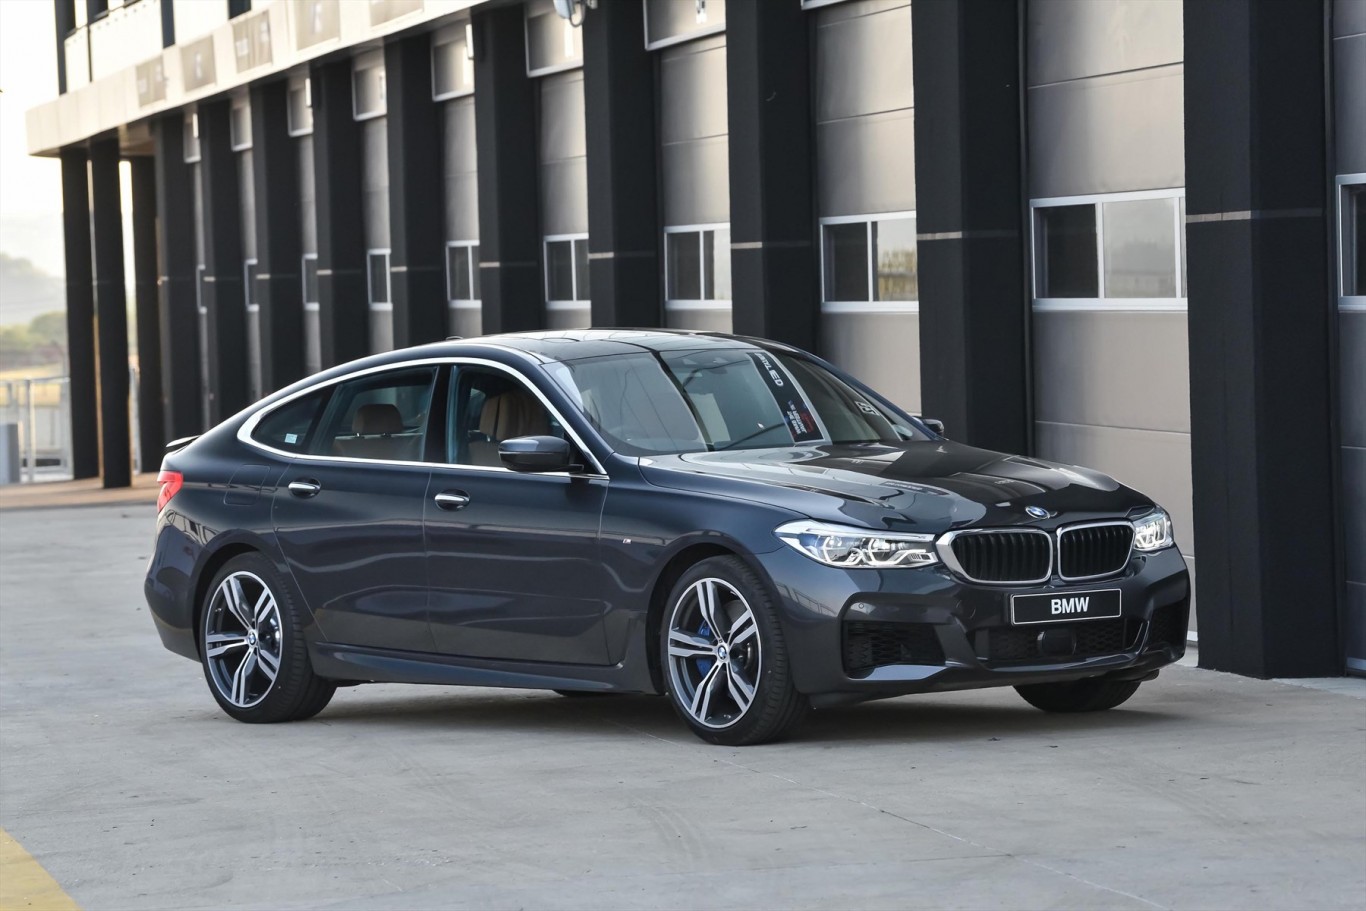 The new BMW 6 Series Gran Turismo now available in South Africa